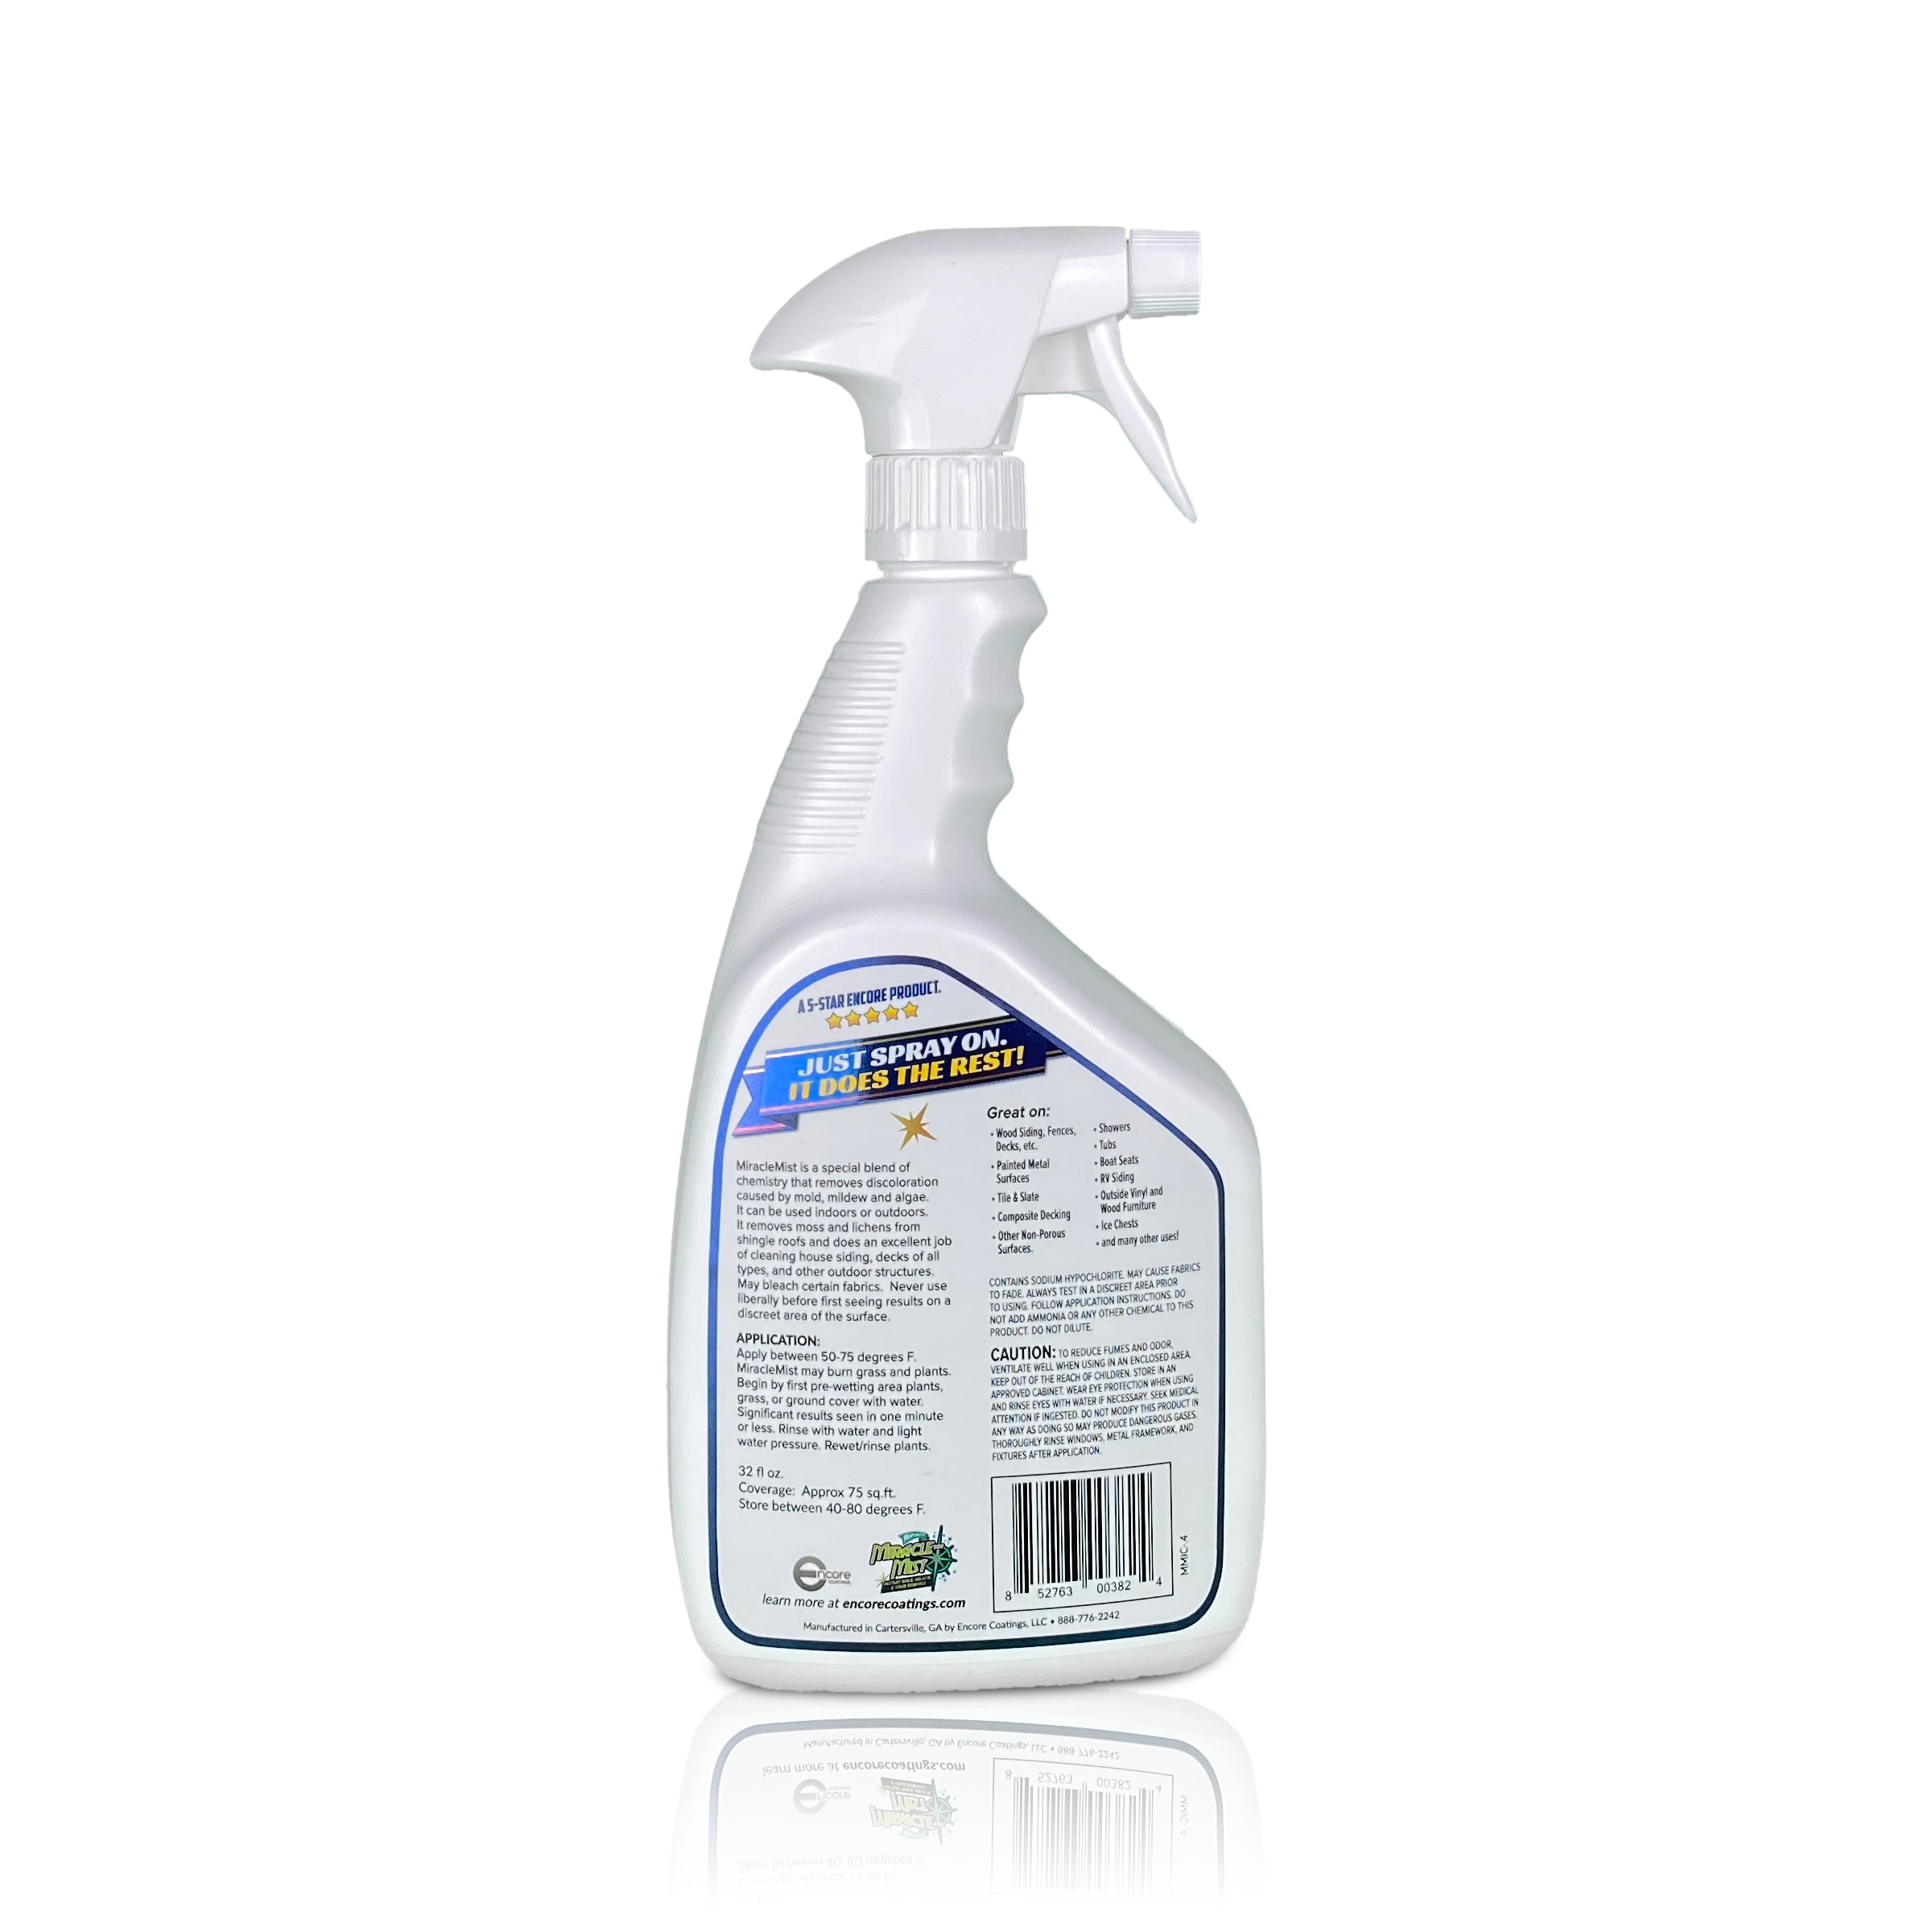 PURCHASE ENTERPRISE Mold Remover Spray For Indoor & Outdoor Paint, Walls,  Floors, Toilets and Tiles